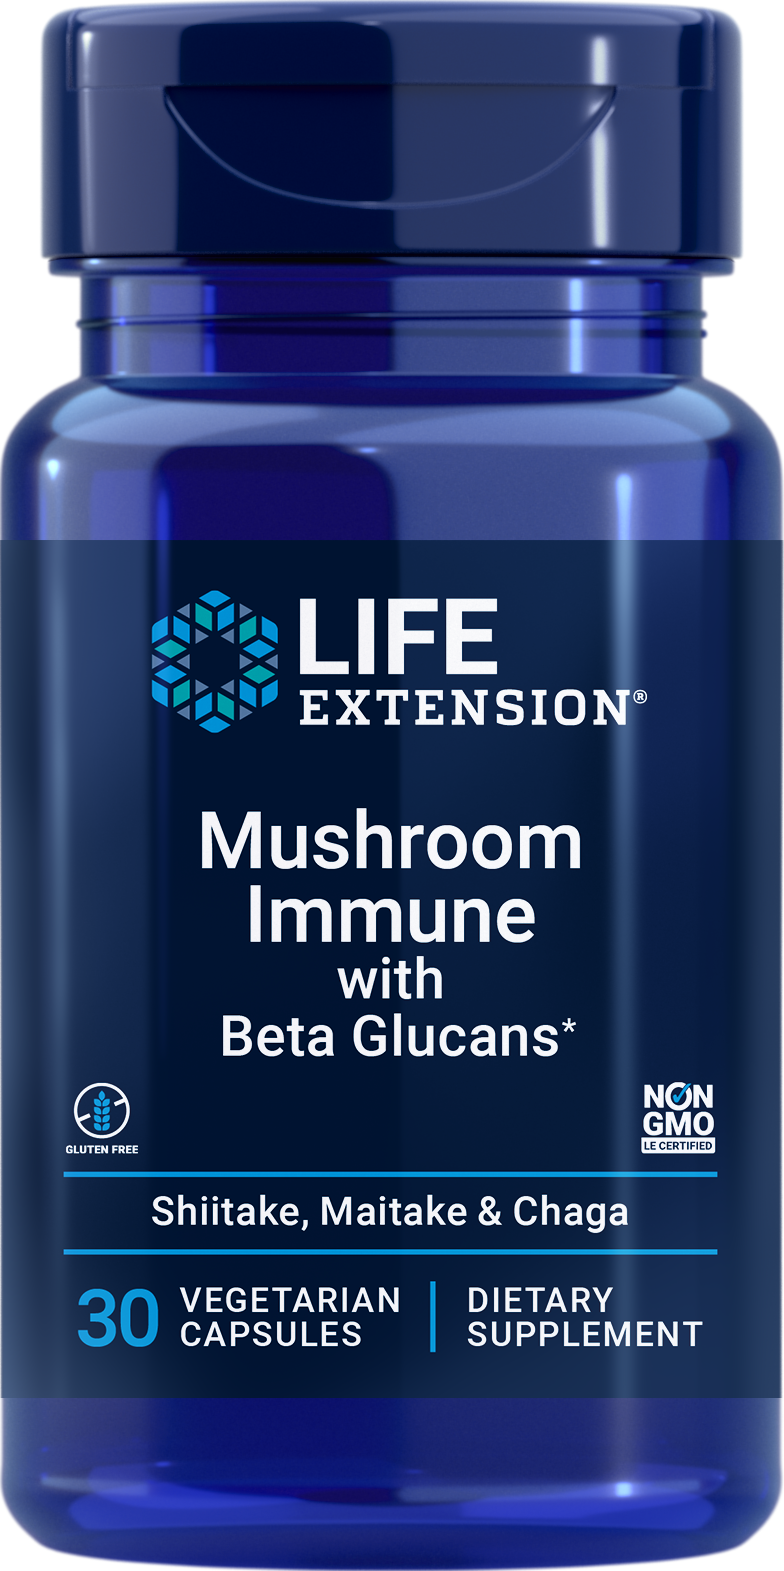 Life Extension’s Mushroom Immune with Beta Glucans provides a blend of shitake, maitake and chaga mushrooms known for their immune health benefits along with beta-glucans in a gluten-free, vegetarian and non-GMO formula, and it comes in easy-to-swallow, once-daily capsules. 